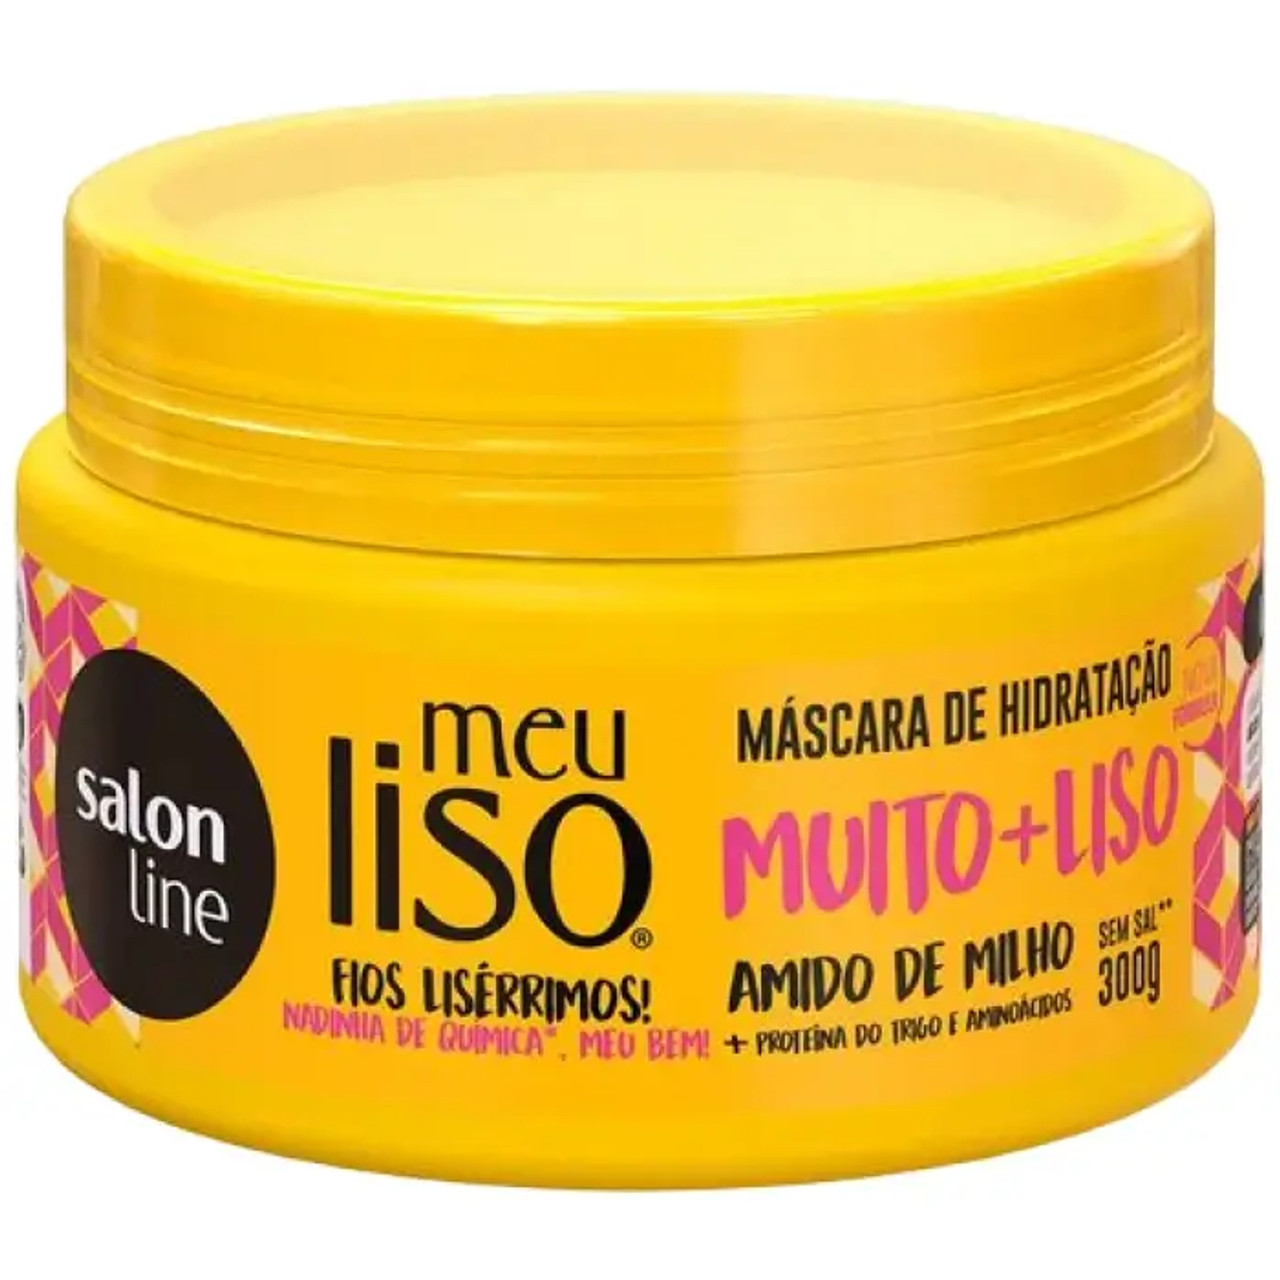 Salon Line Muito + Liso Hydrating Mask (6/Case) 300g - Intensive Hair Treatment - Chicken Pieces